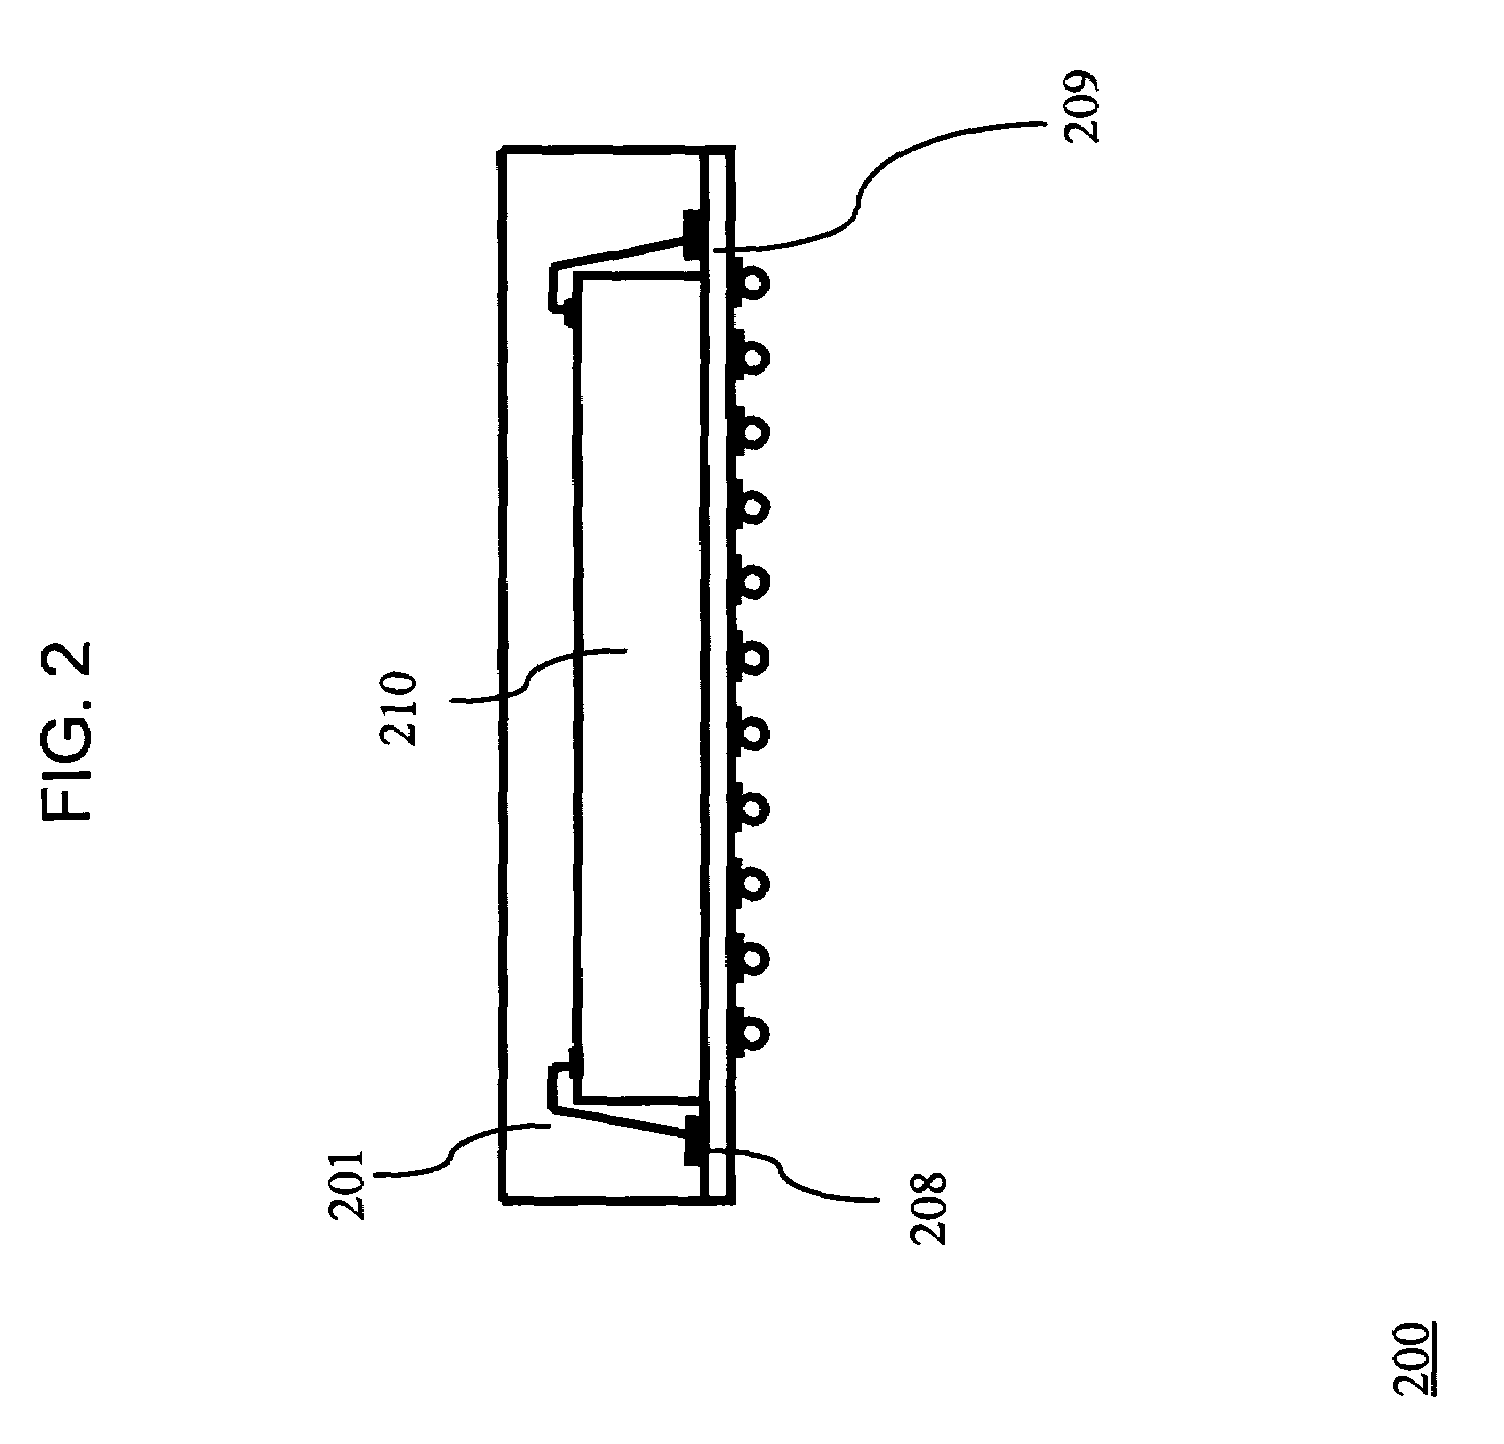 Components, methods and assemblies for multi-chip packages